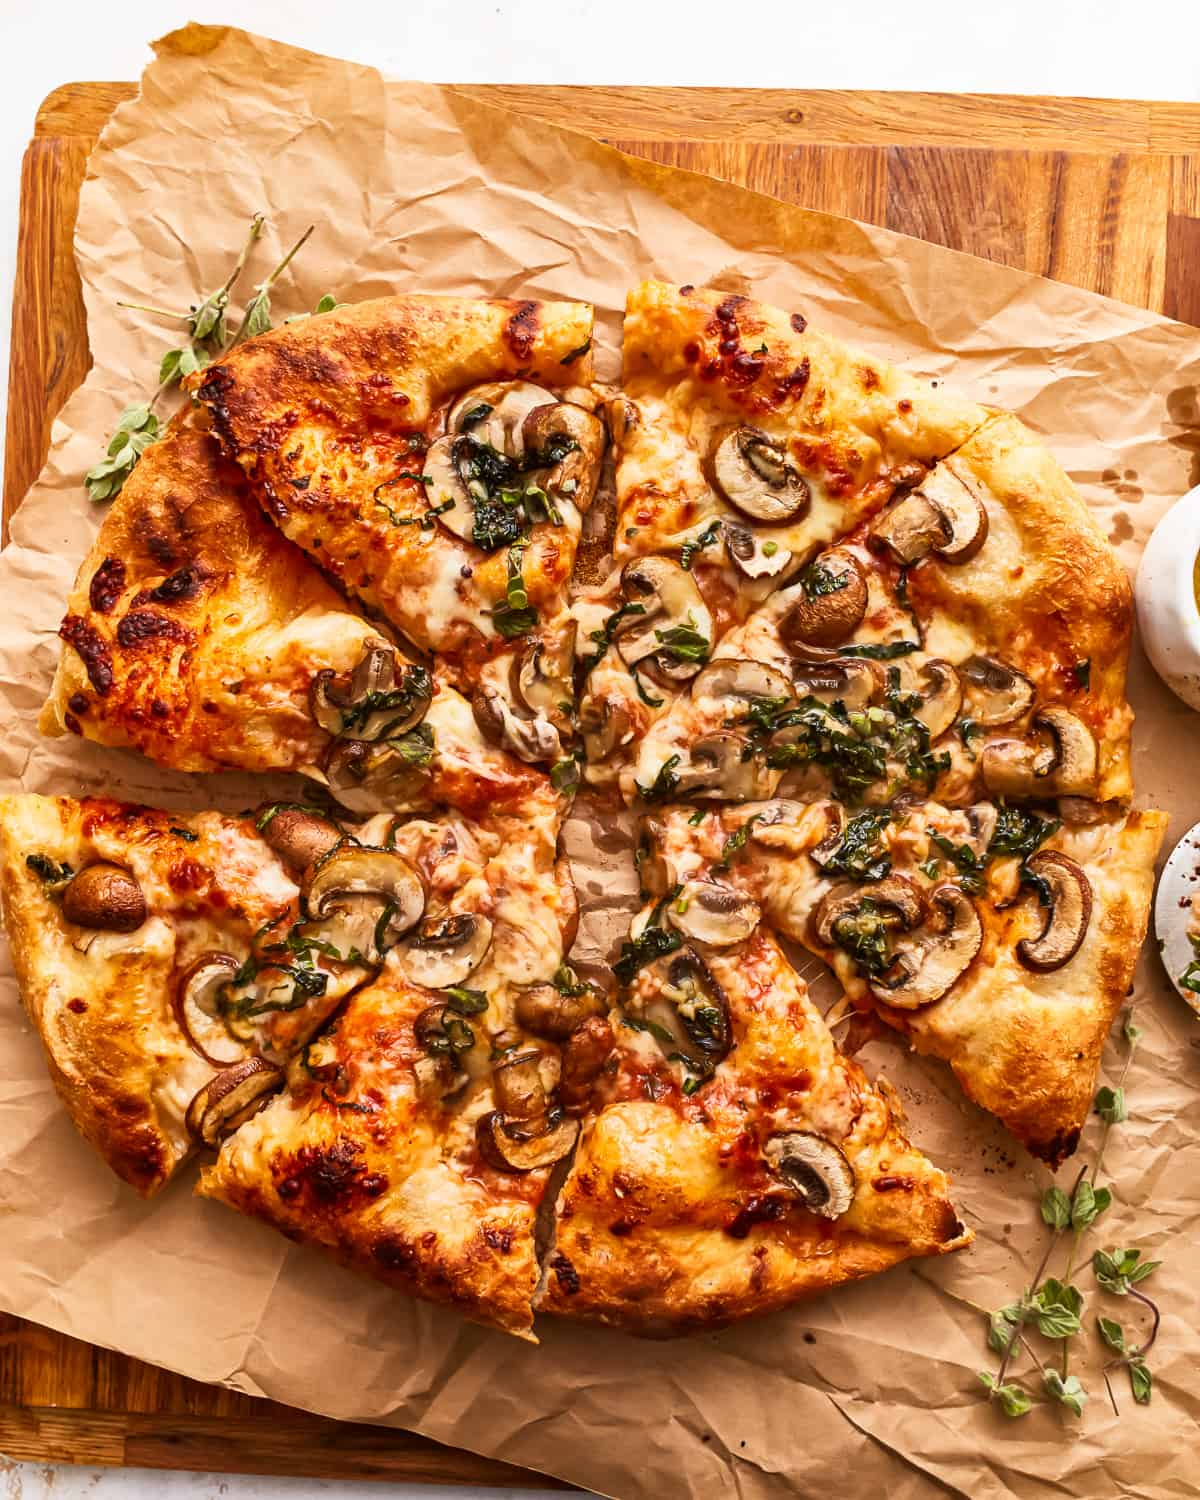 A pizza with mushrooms and herbs on a wooden cutting board.